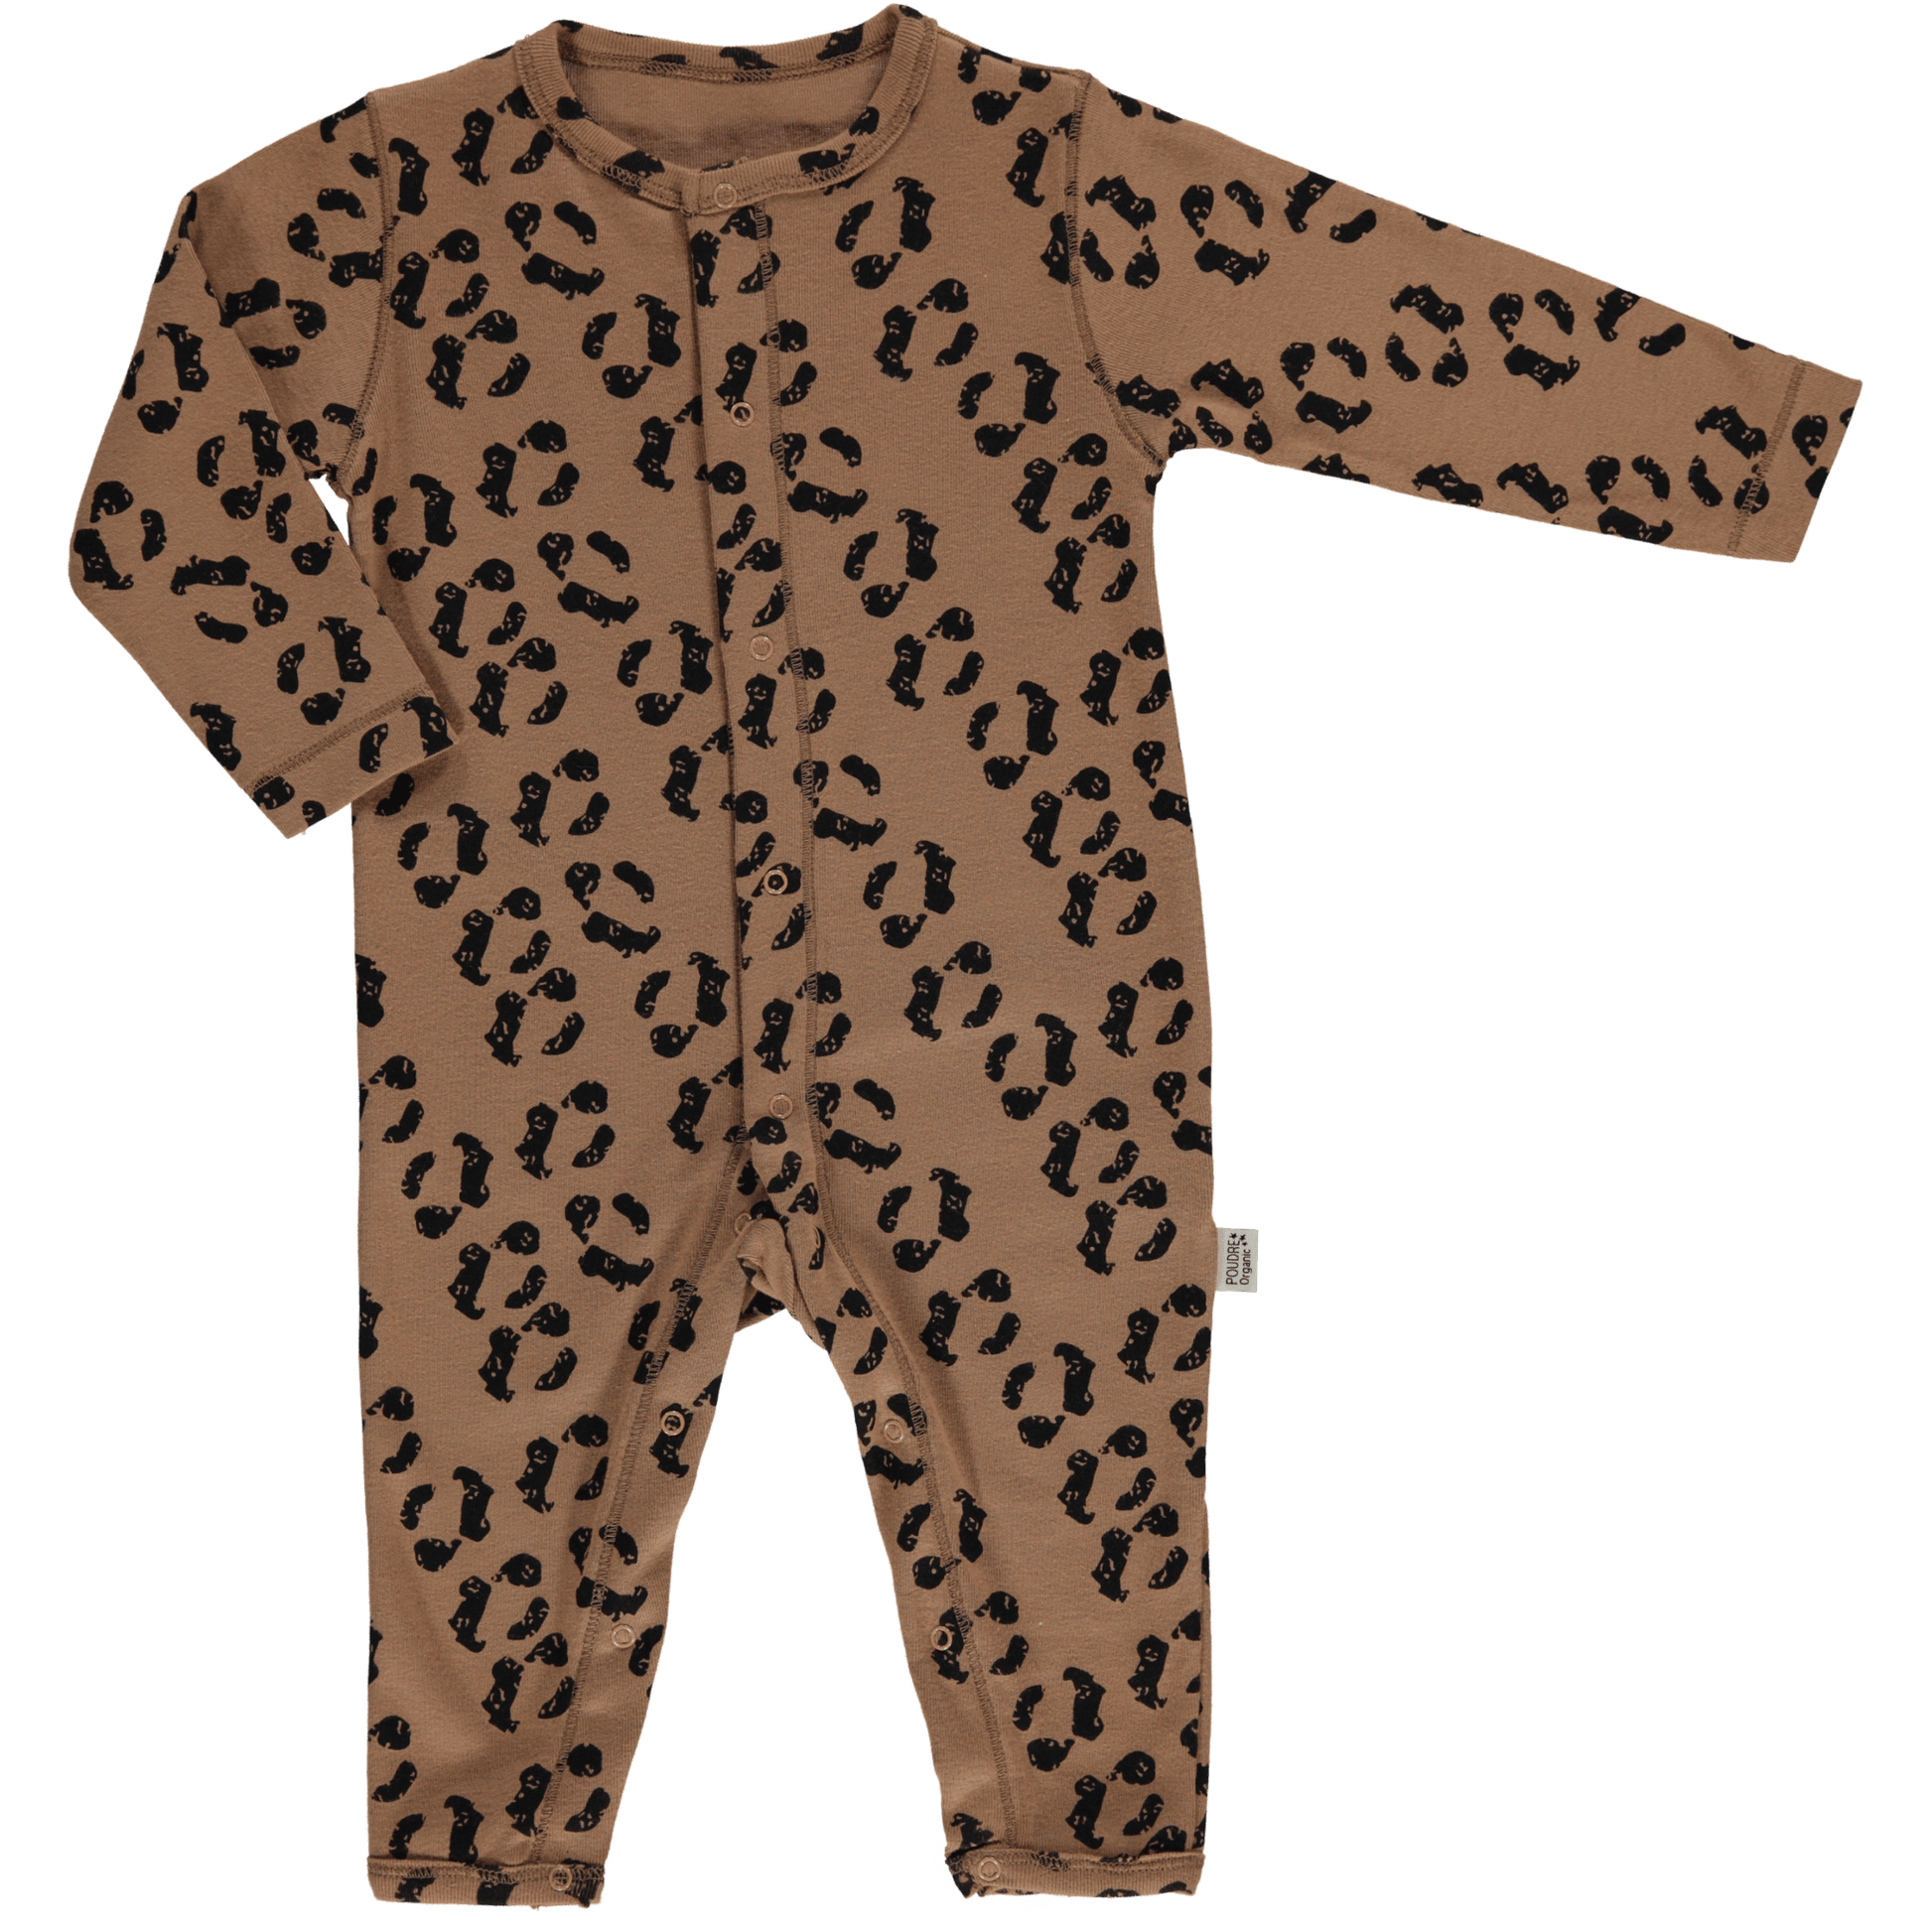 Poudre Organic Clothing / One-pieces 3M Airelle One-piece PJs